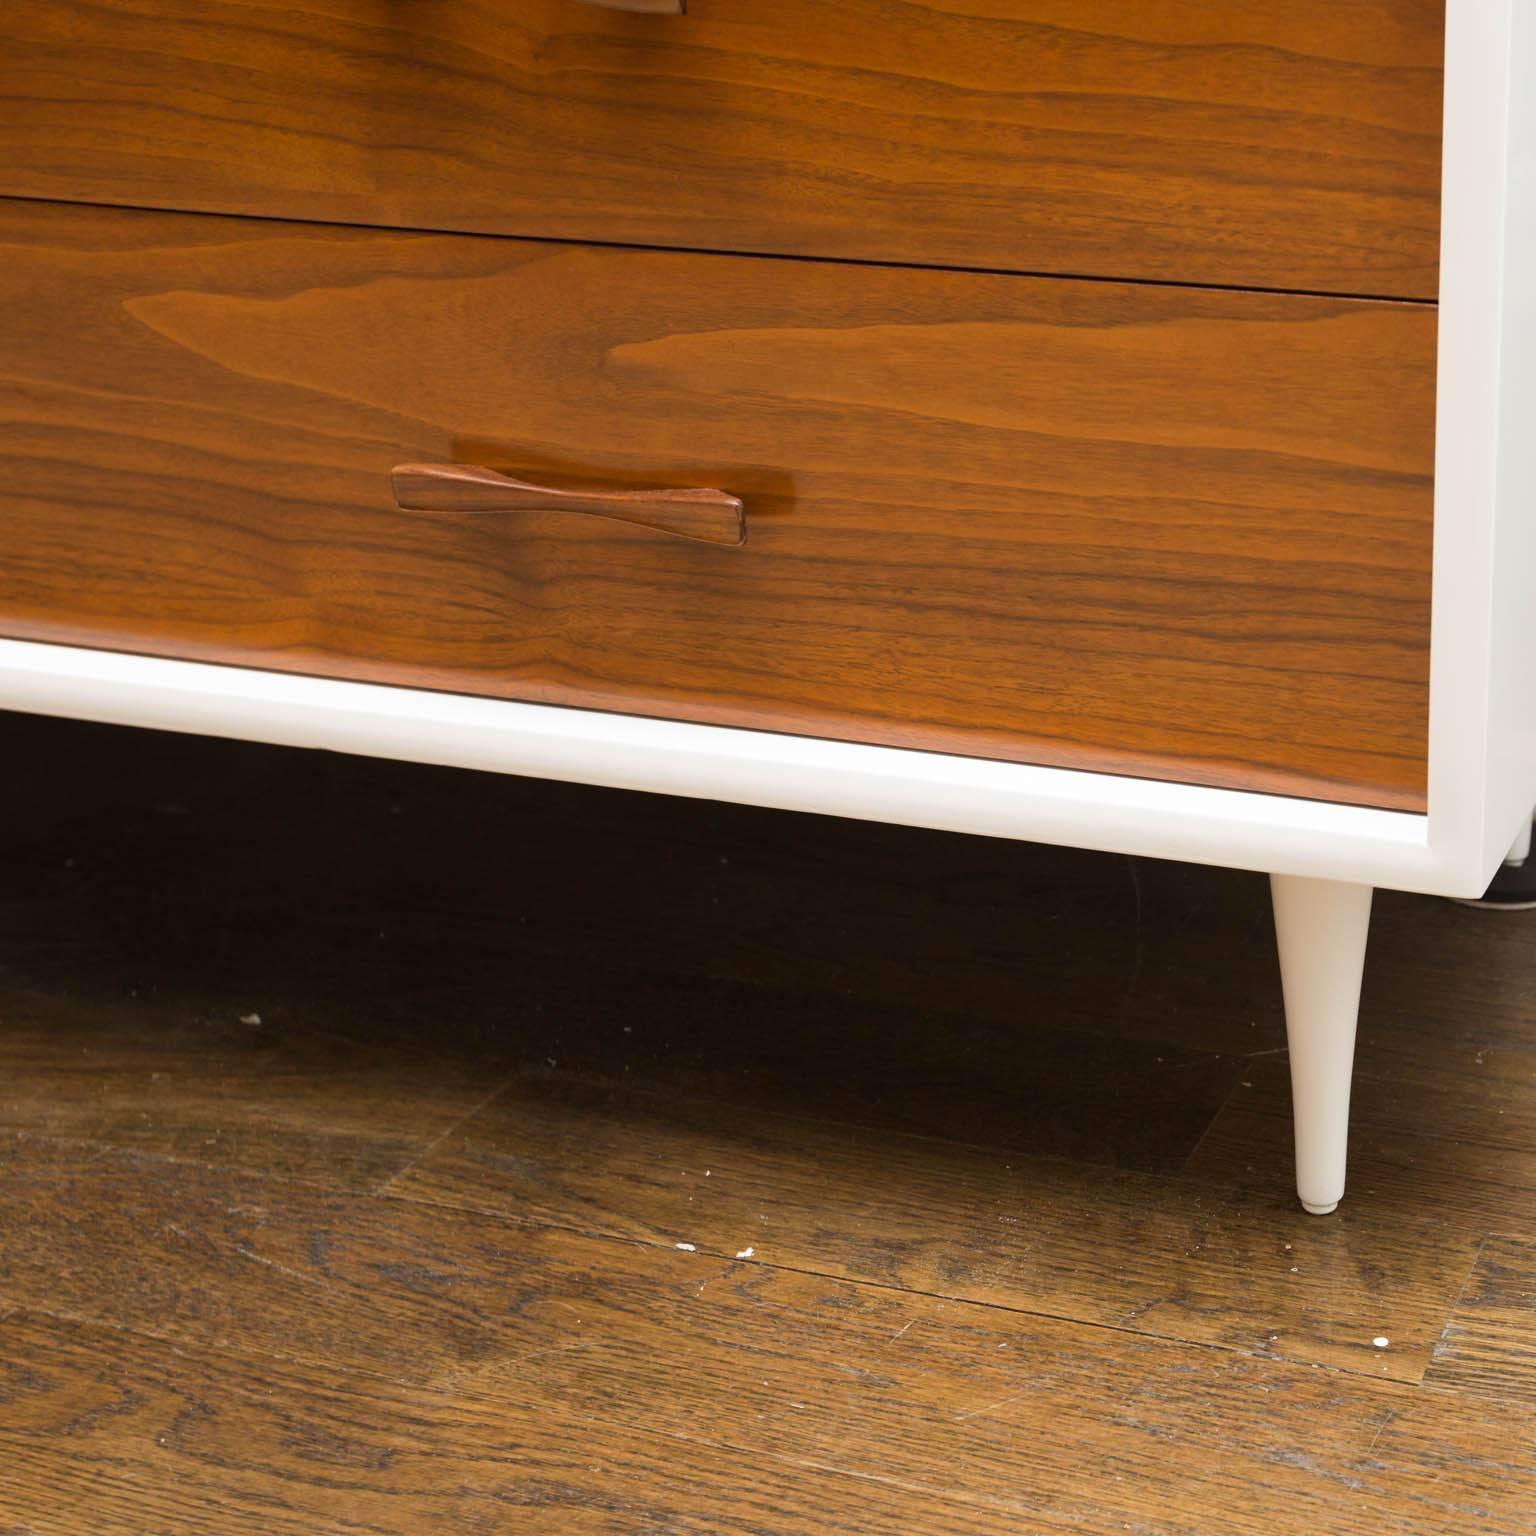 American Lacquered Two-Tone Mid-Century Modern Low Dresser